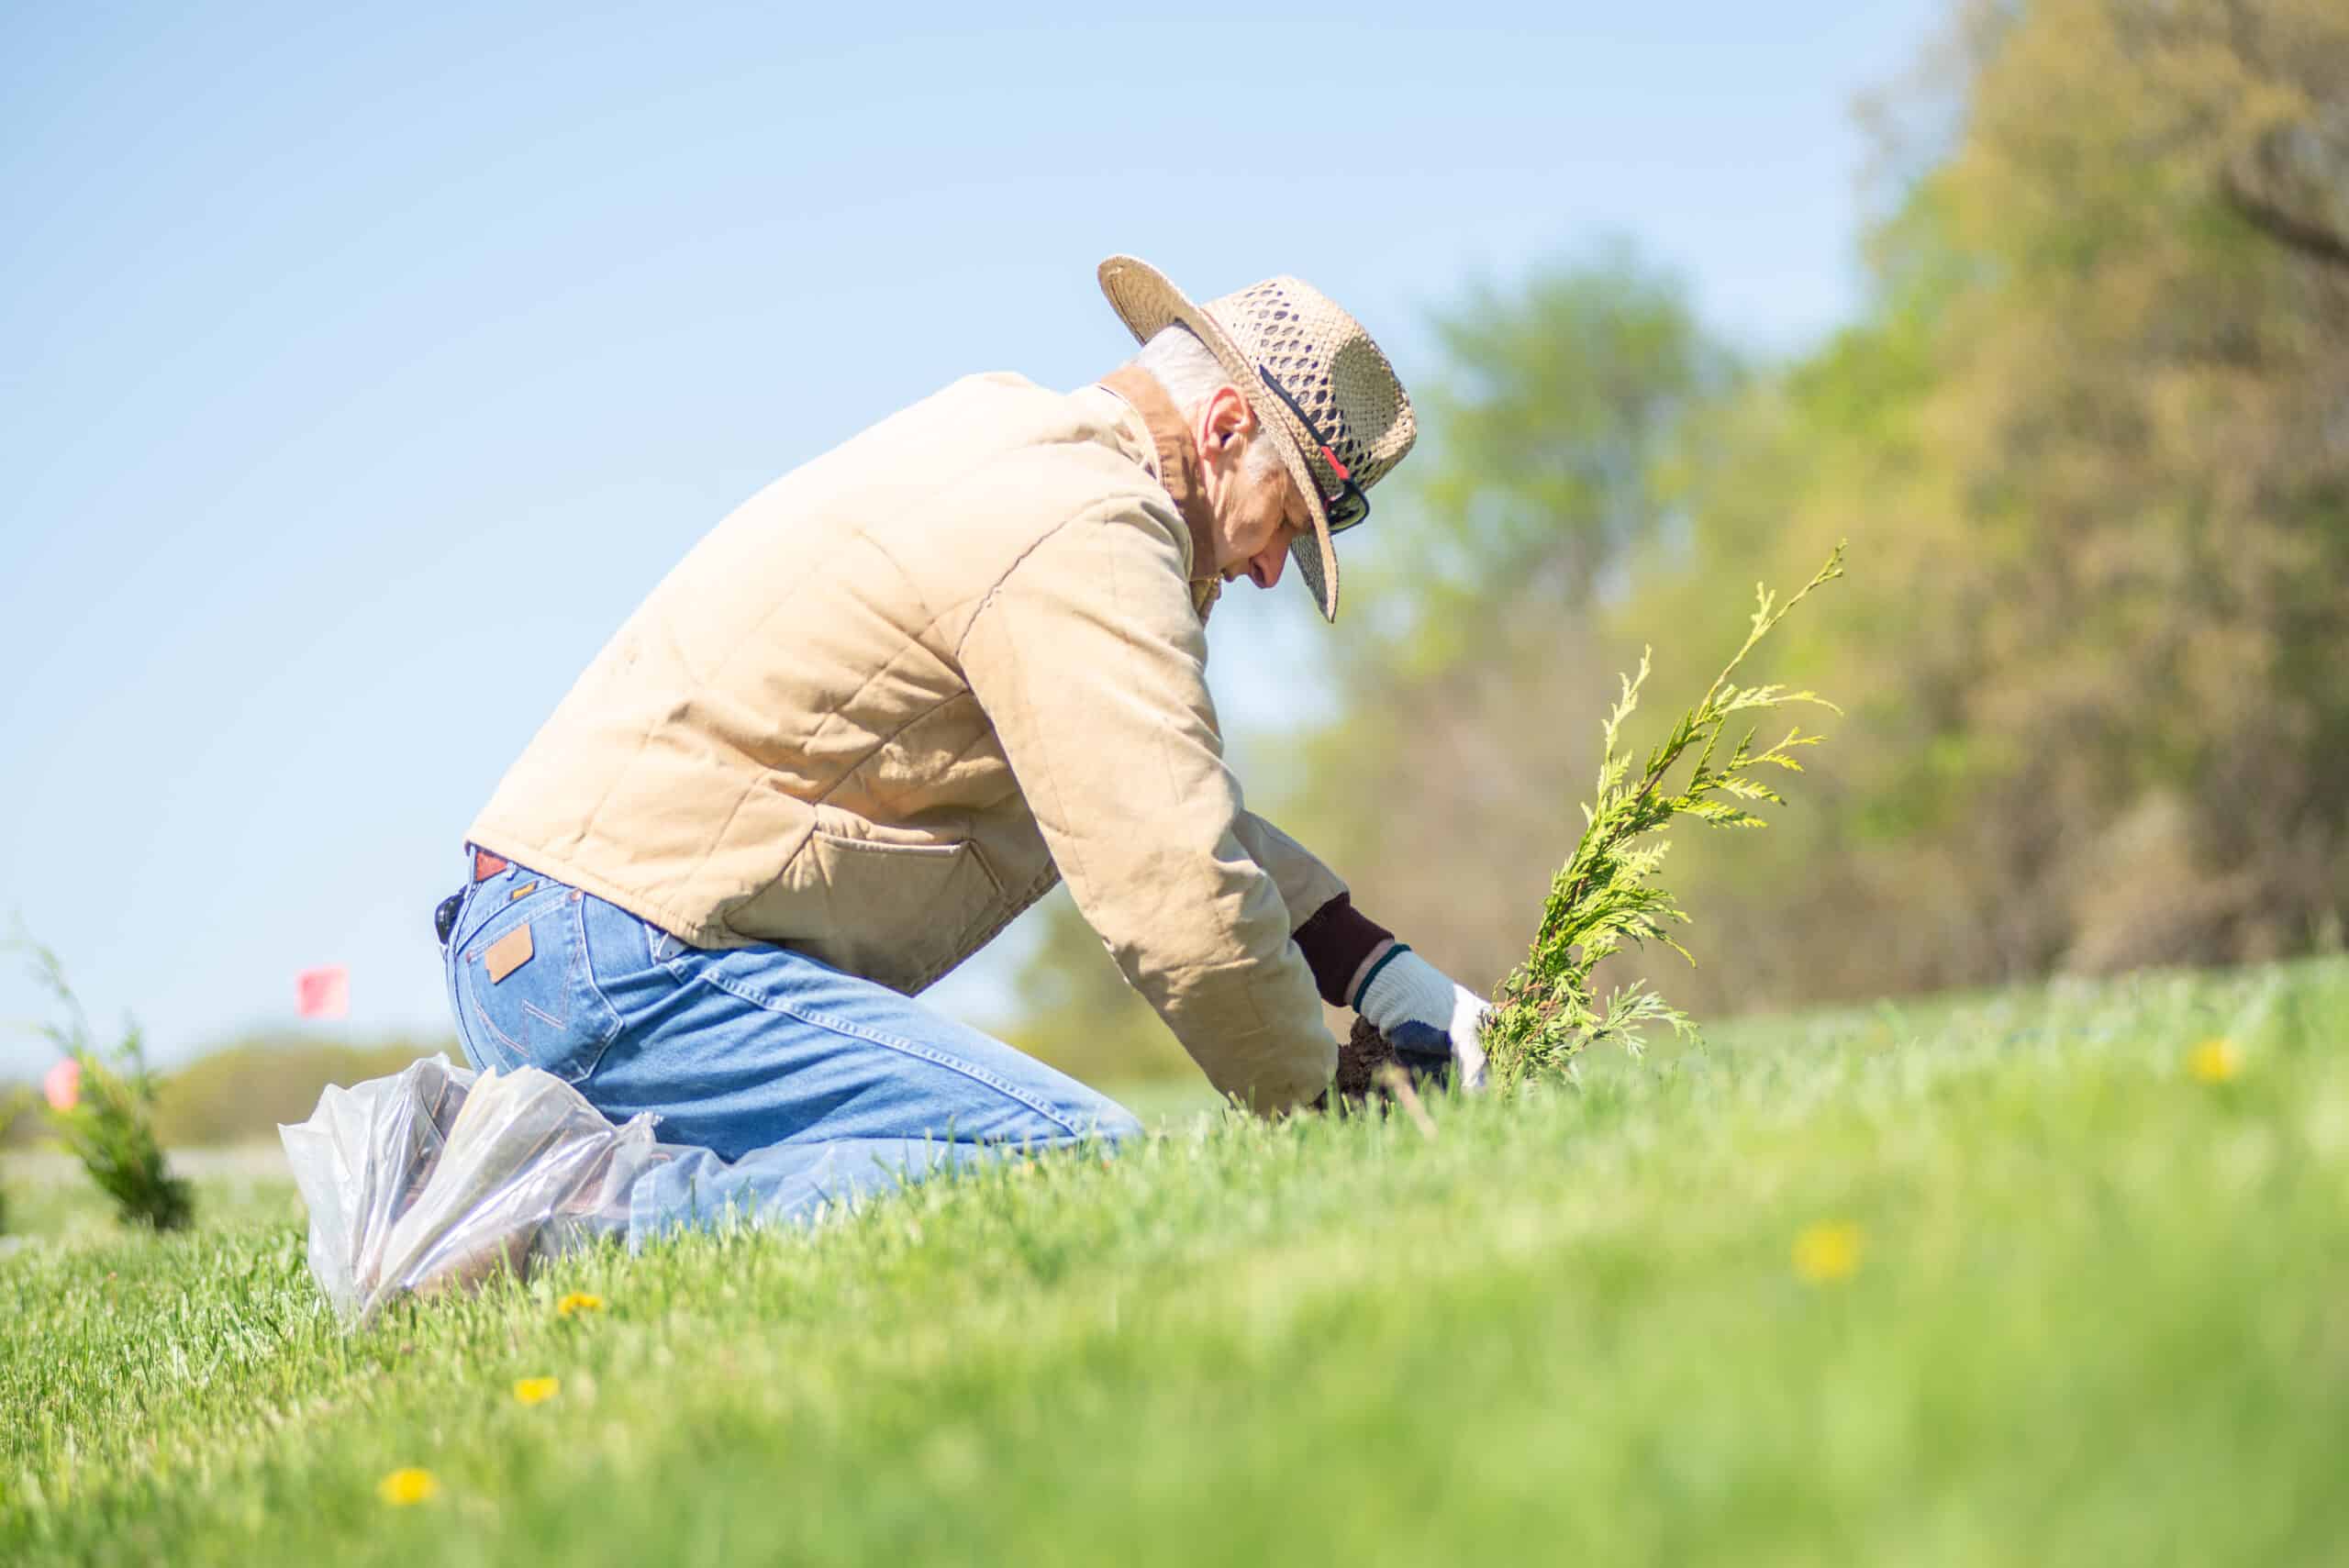 A person stooped over, planting a sapling in a field